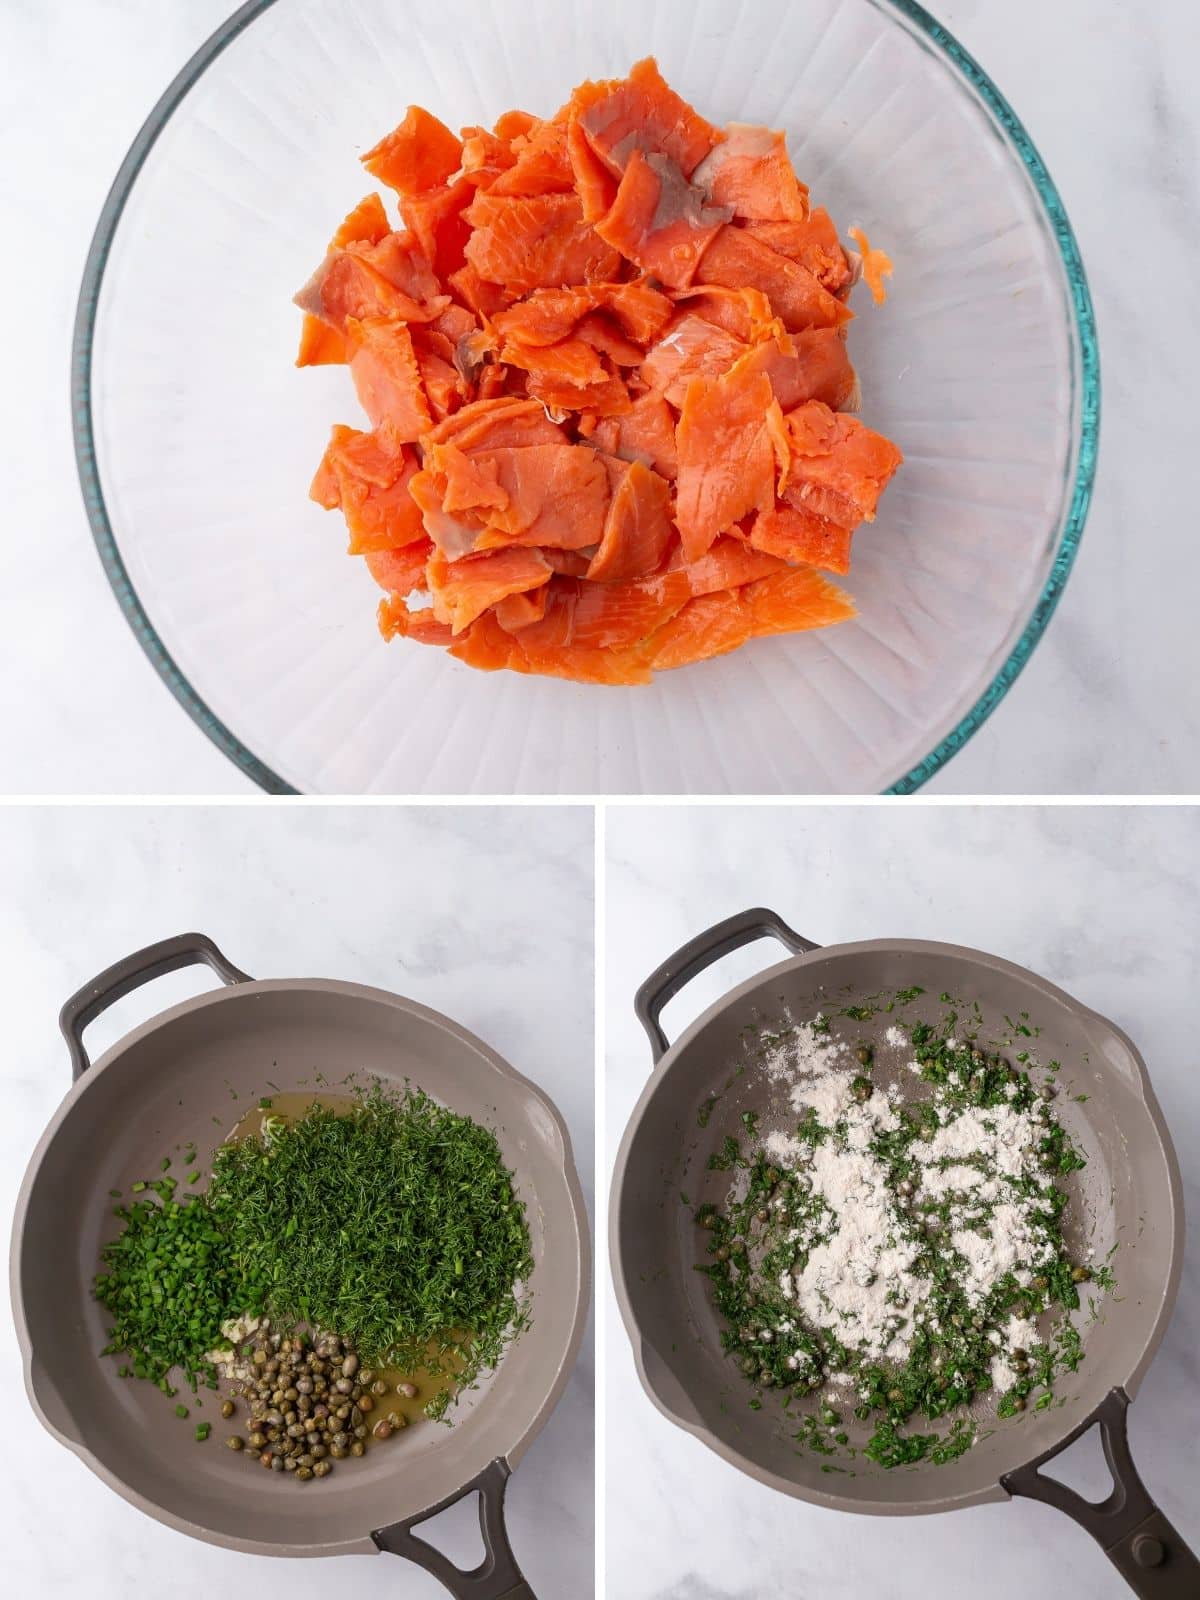 A collage of three images showing how to make this recipe.